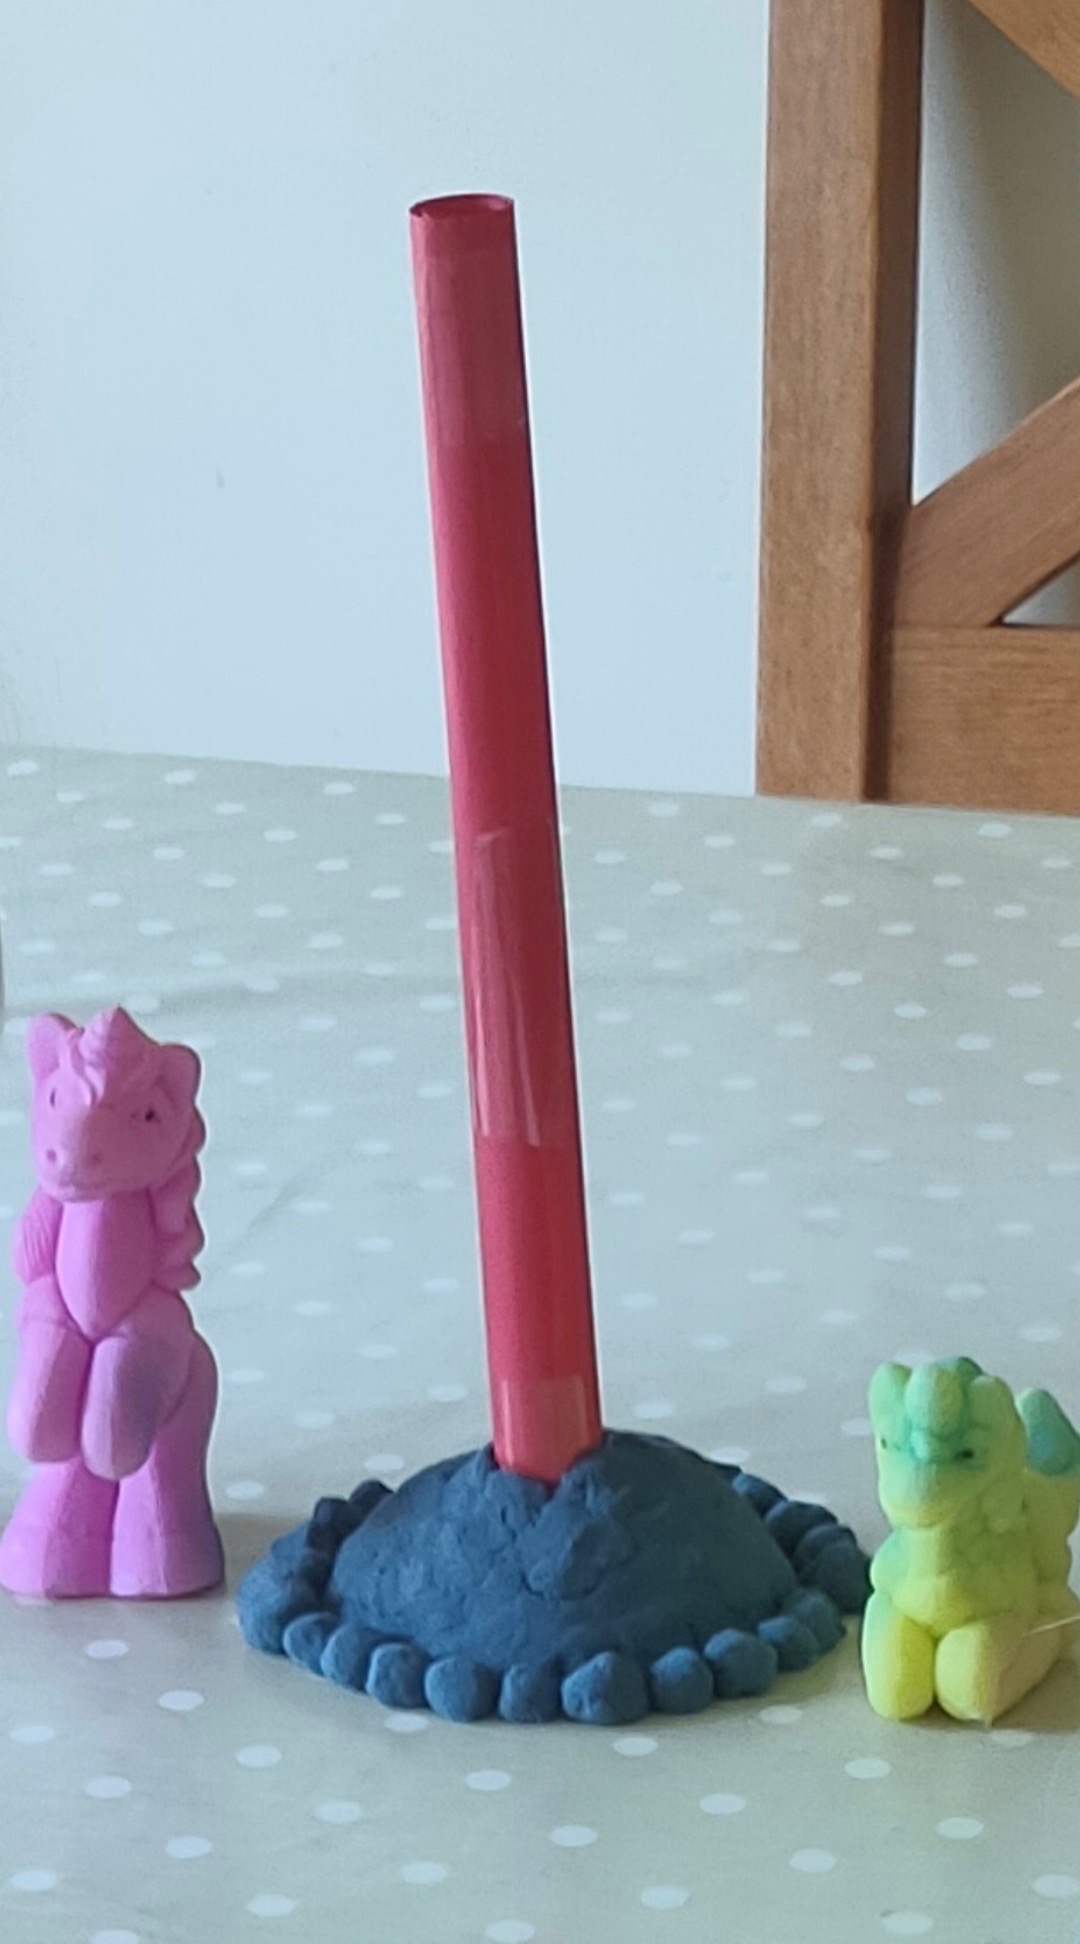 'Erupting volcano with pretty friends!' by Lily (5) from Cork